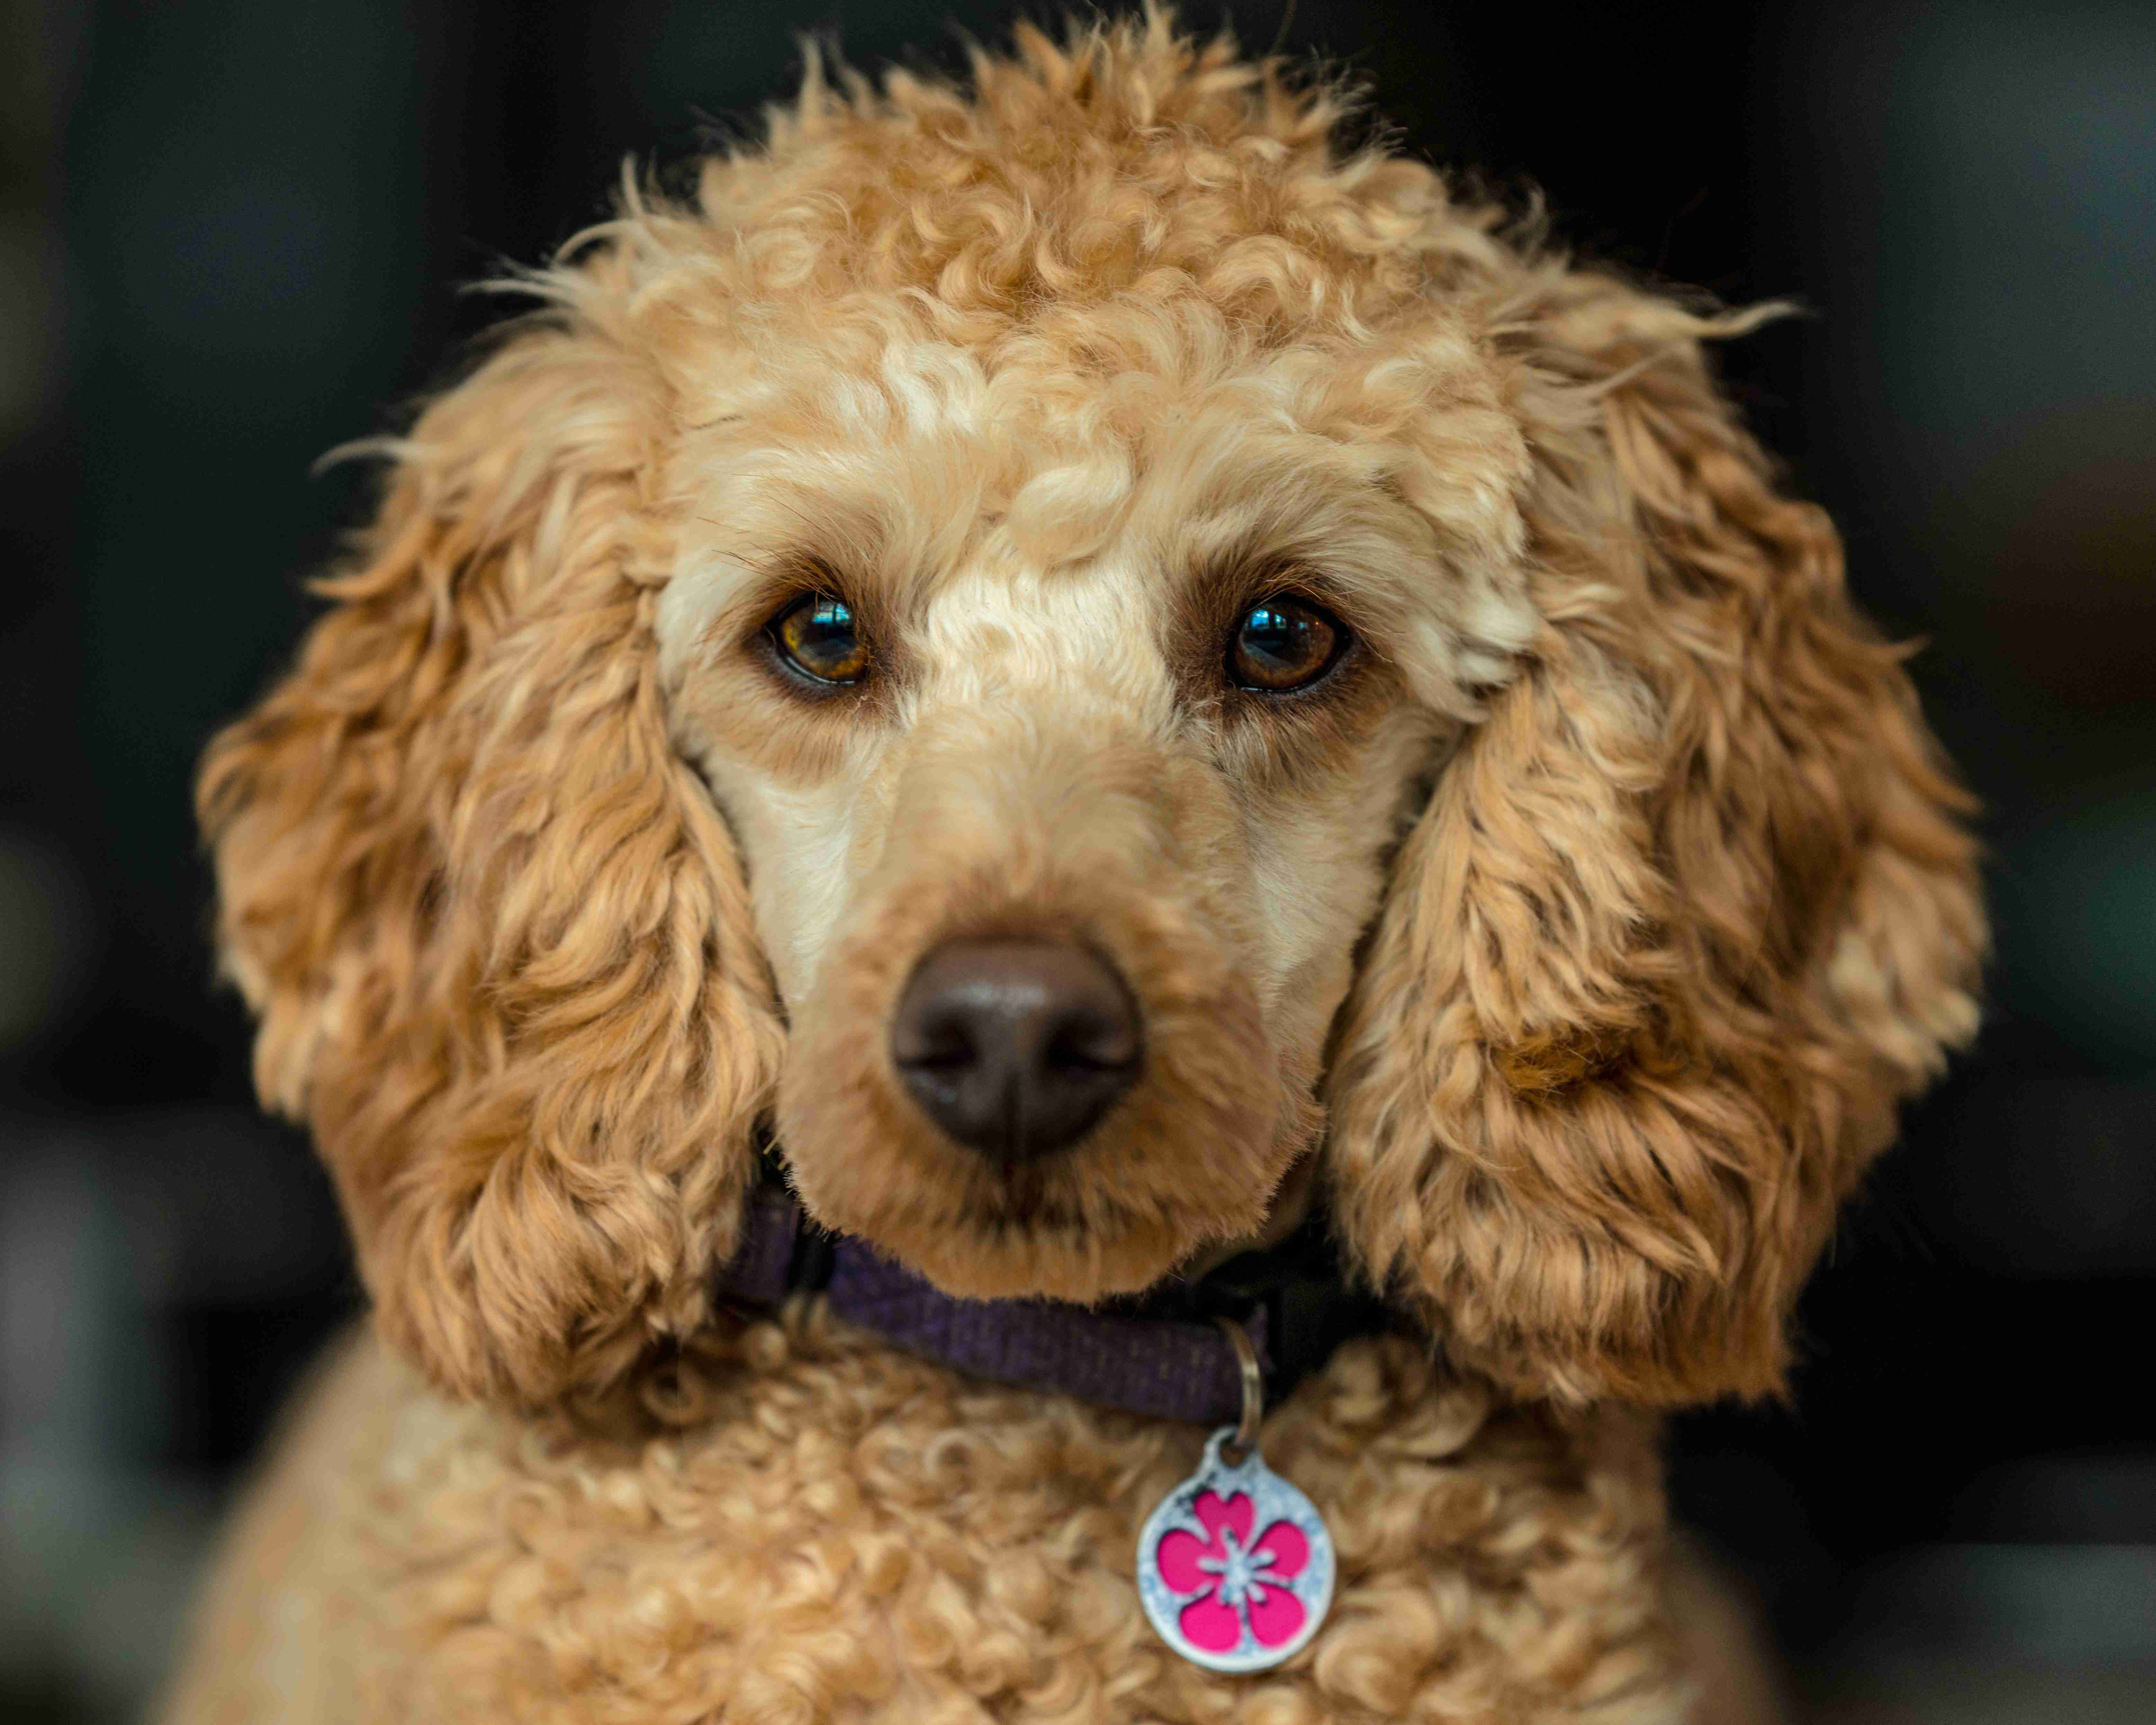 Do Poodles often experience ear infections?